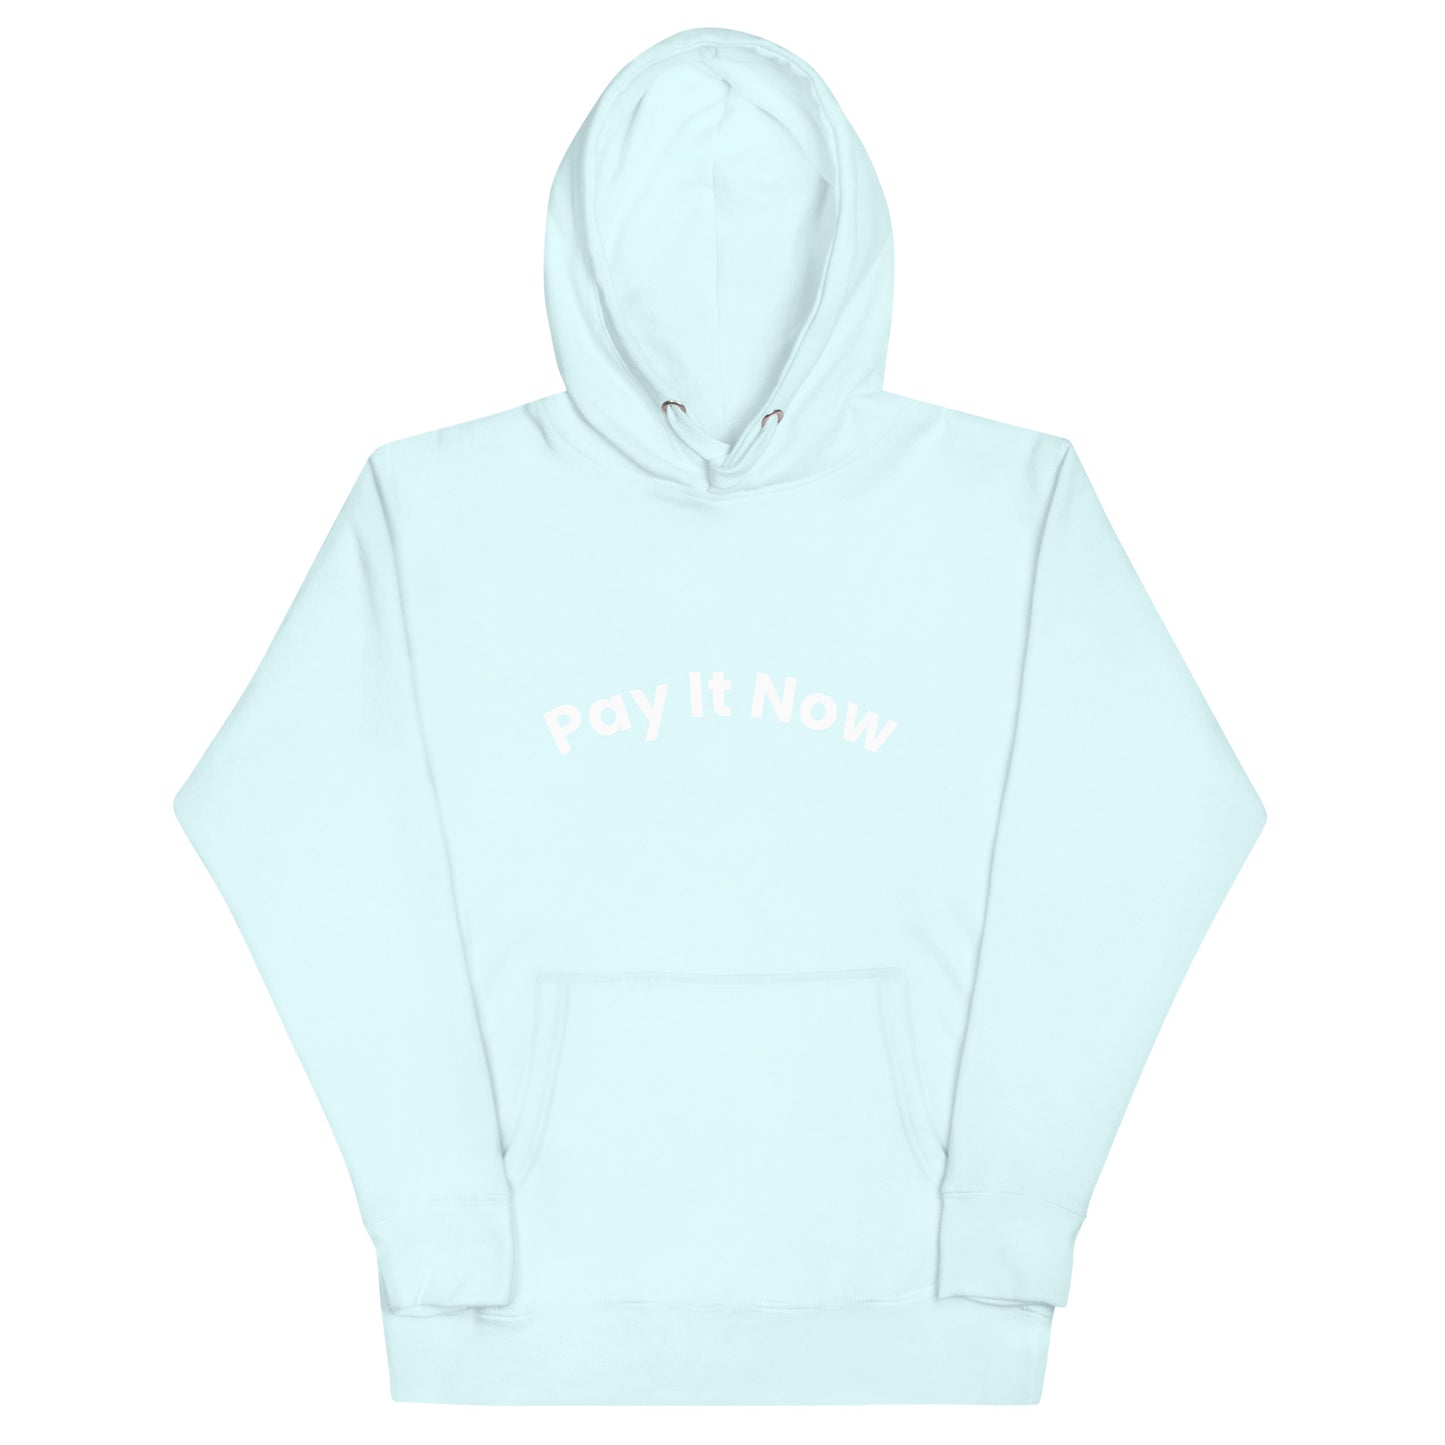 Unisex Pay It Now hoodie